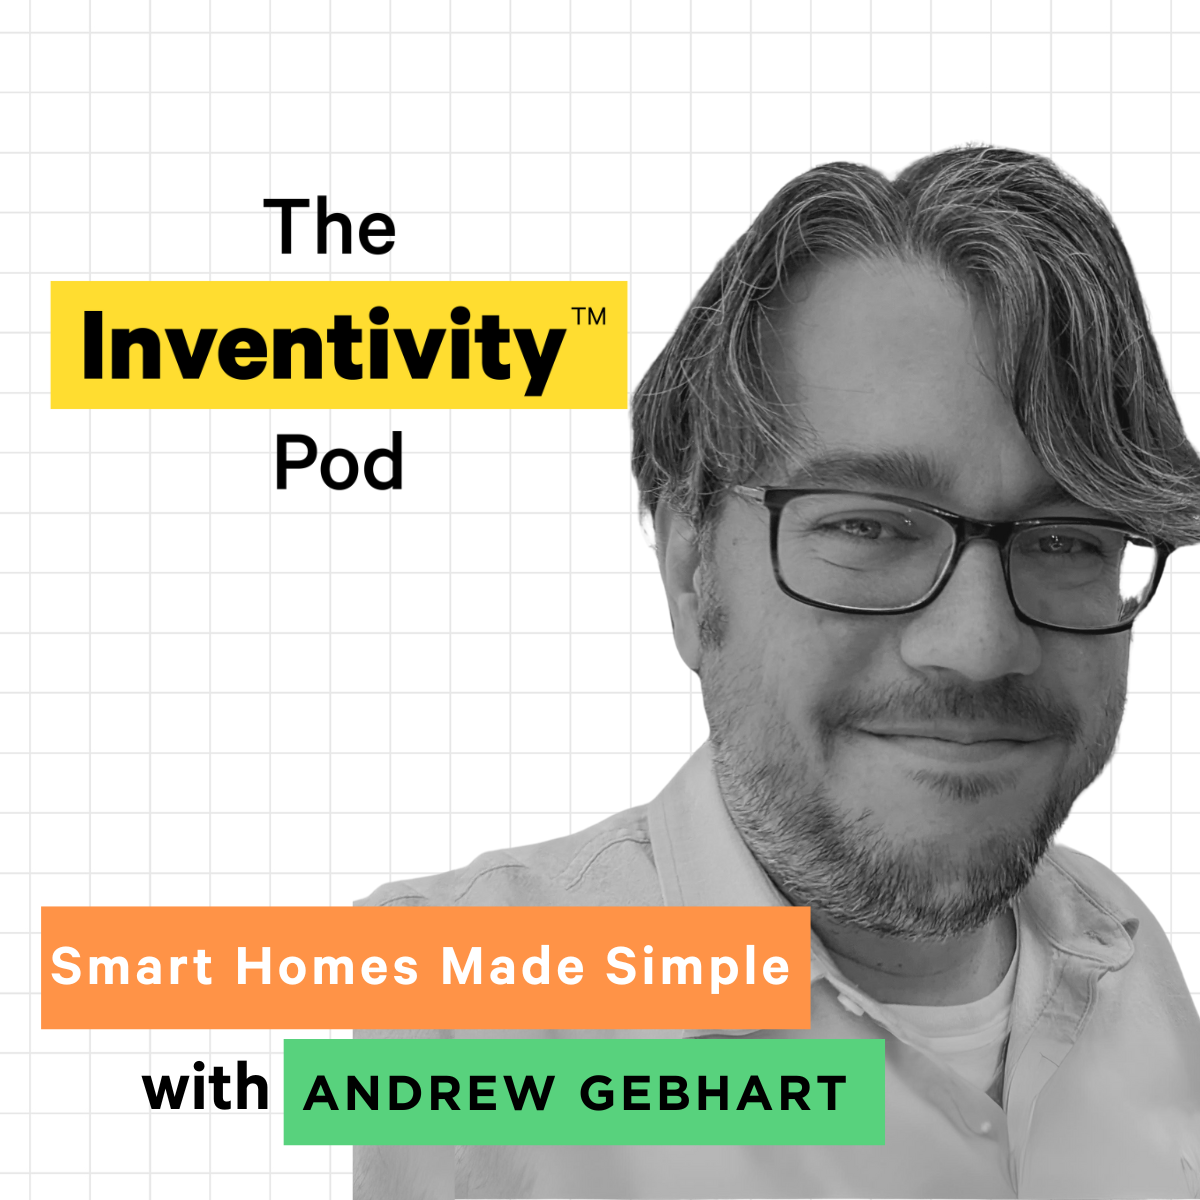 Smart Homes Made Simple with Andrew Gebhart